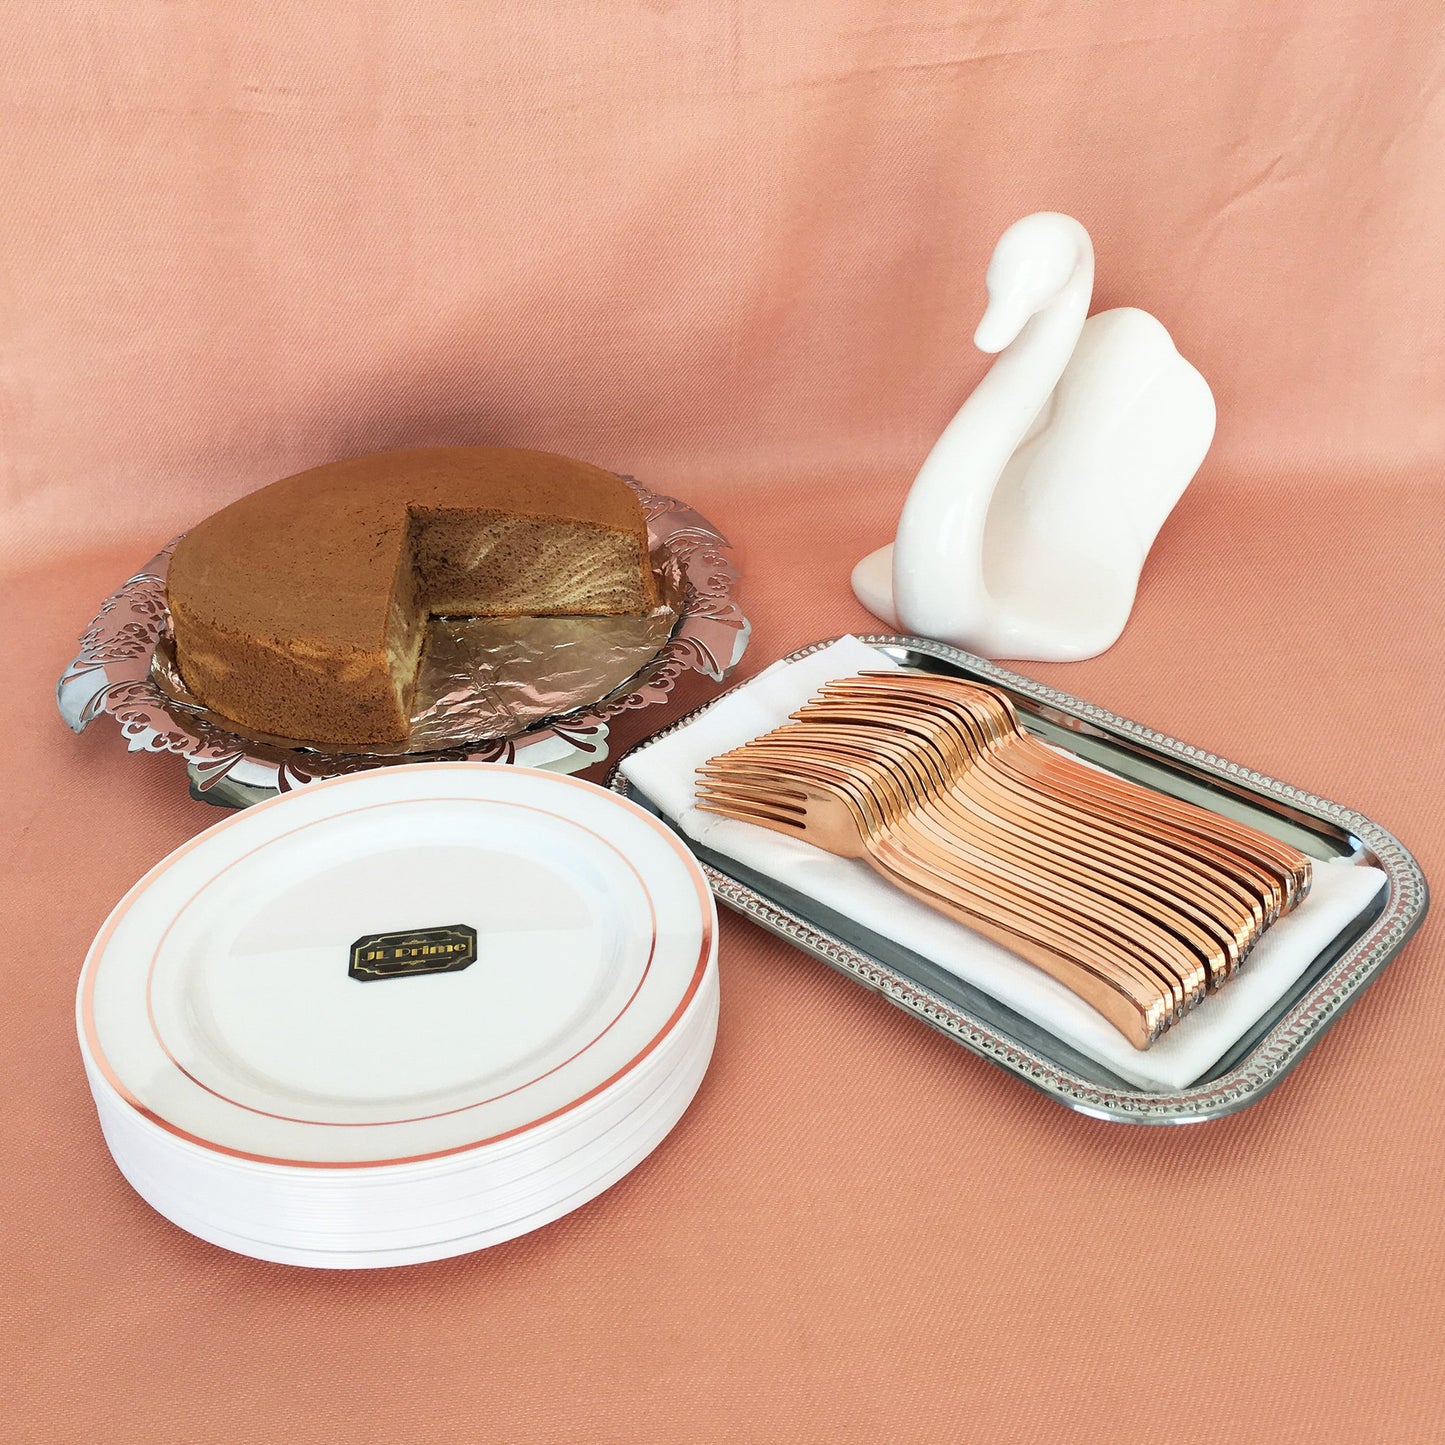 JL Prime 50 Piece Rose Gold Plastic Plates for 25 Guests, Heavy Duty Reusable Disposable Plastic Plates with Rose Gold Rim for Party and Wedding with 25 Dinner Plates and 25 Salad Plates